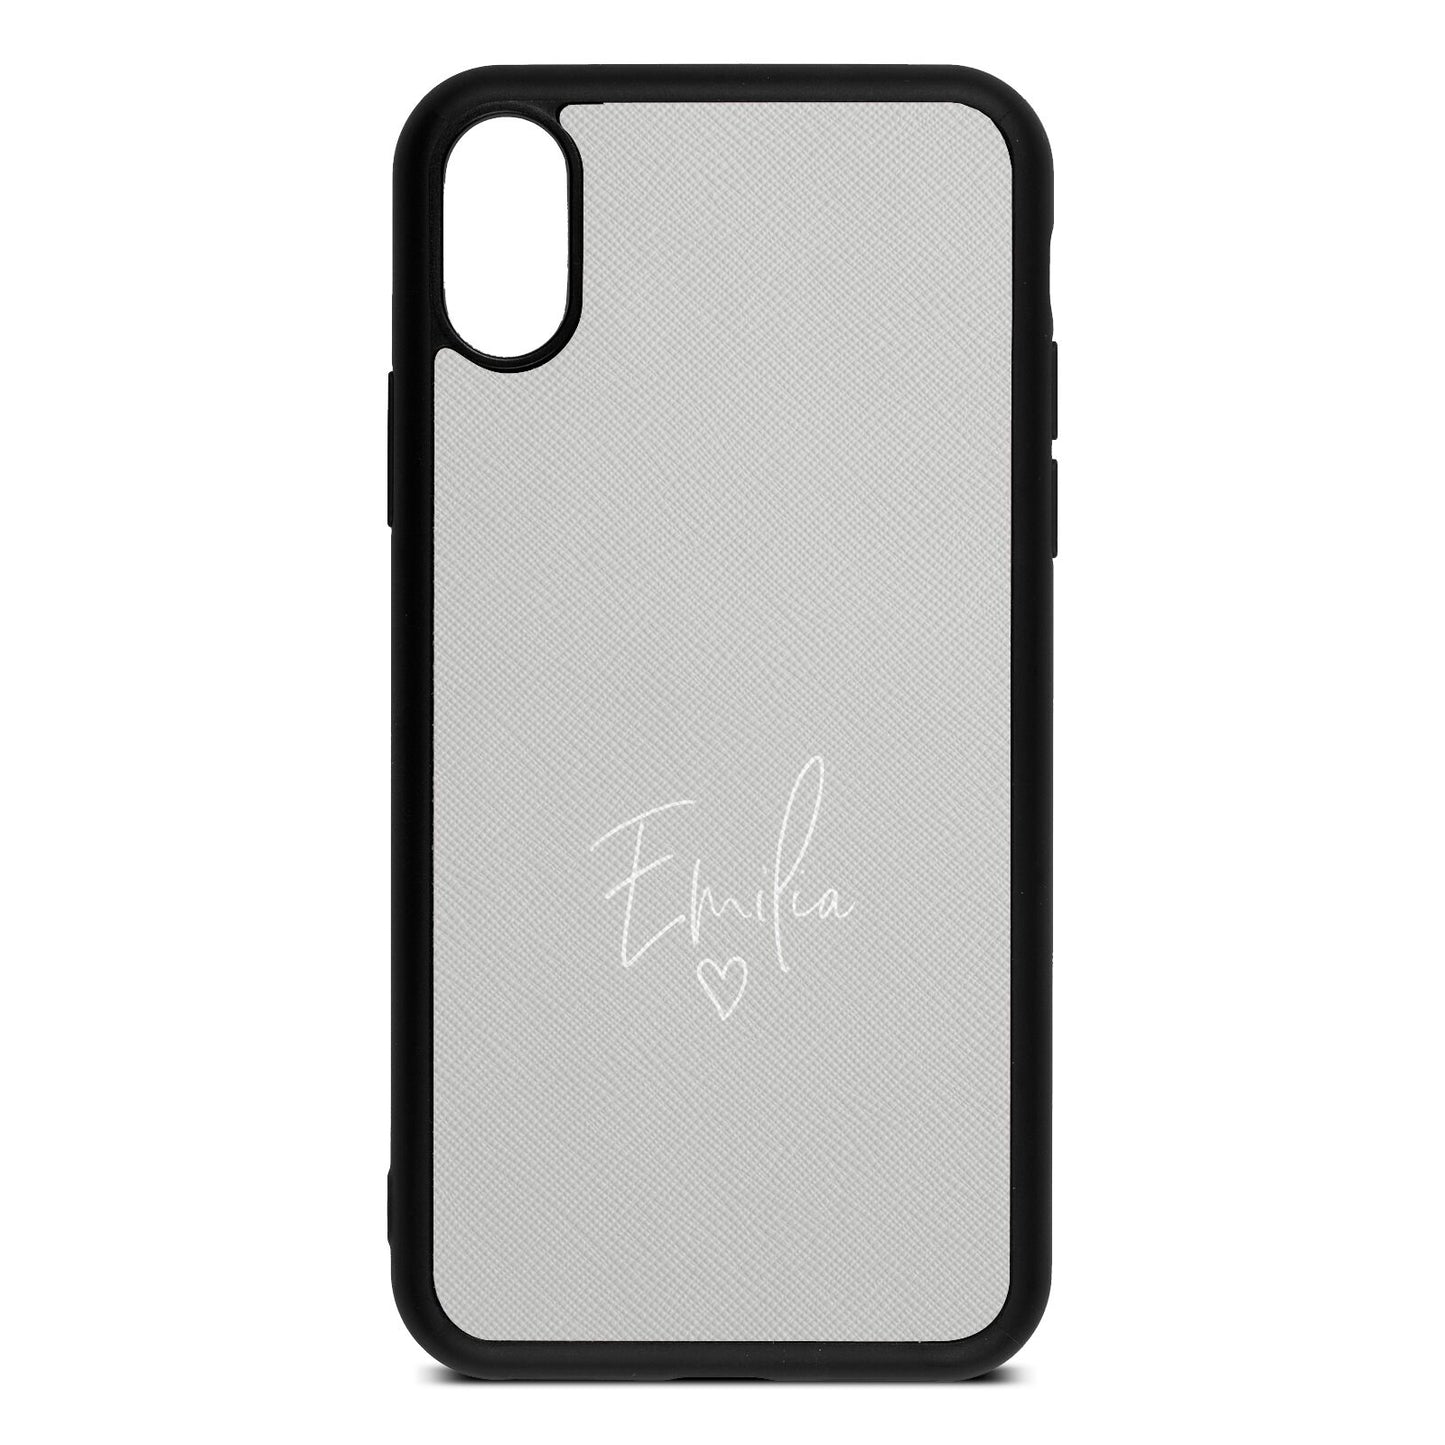 White Handwritten Name Transparent Silver Saffiano Leather iPhone Xs Case